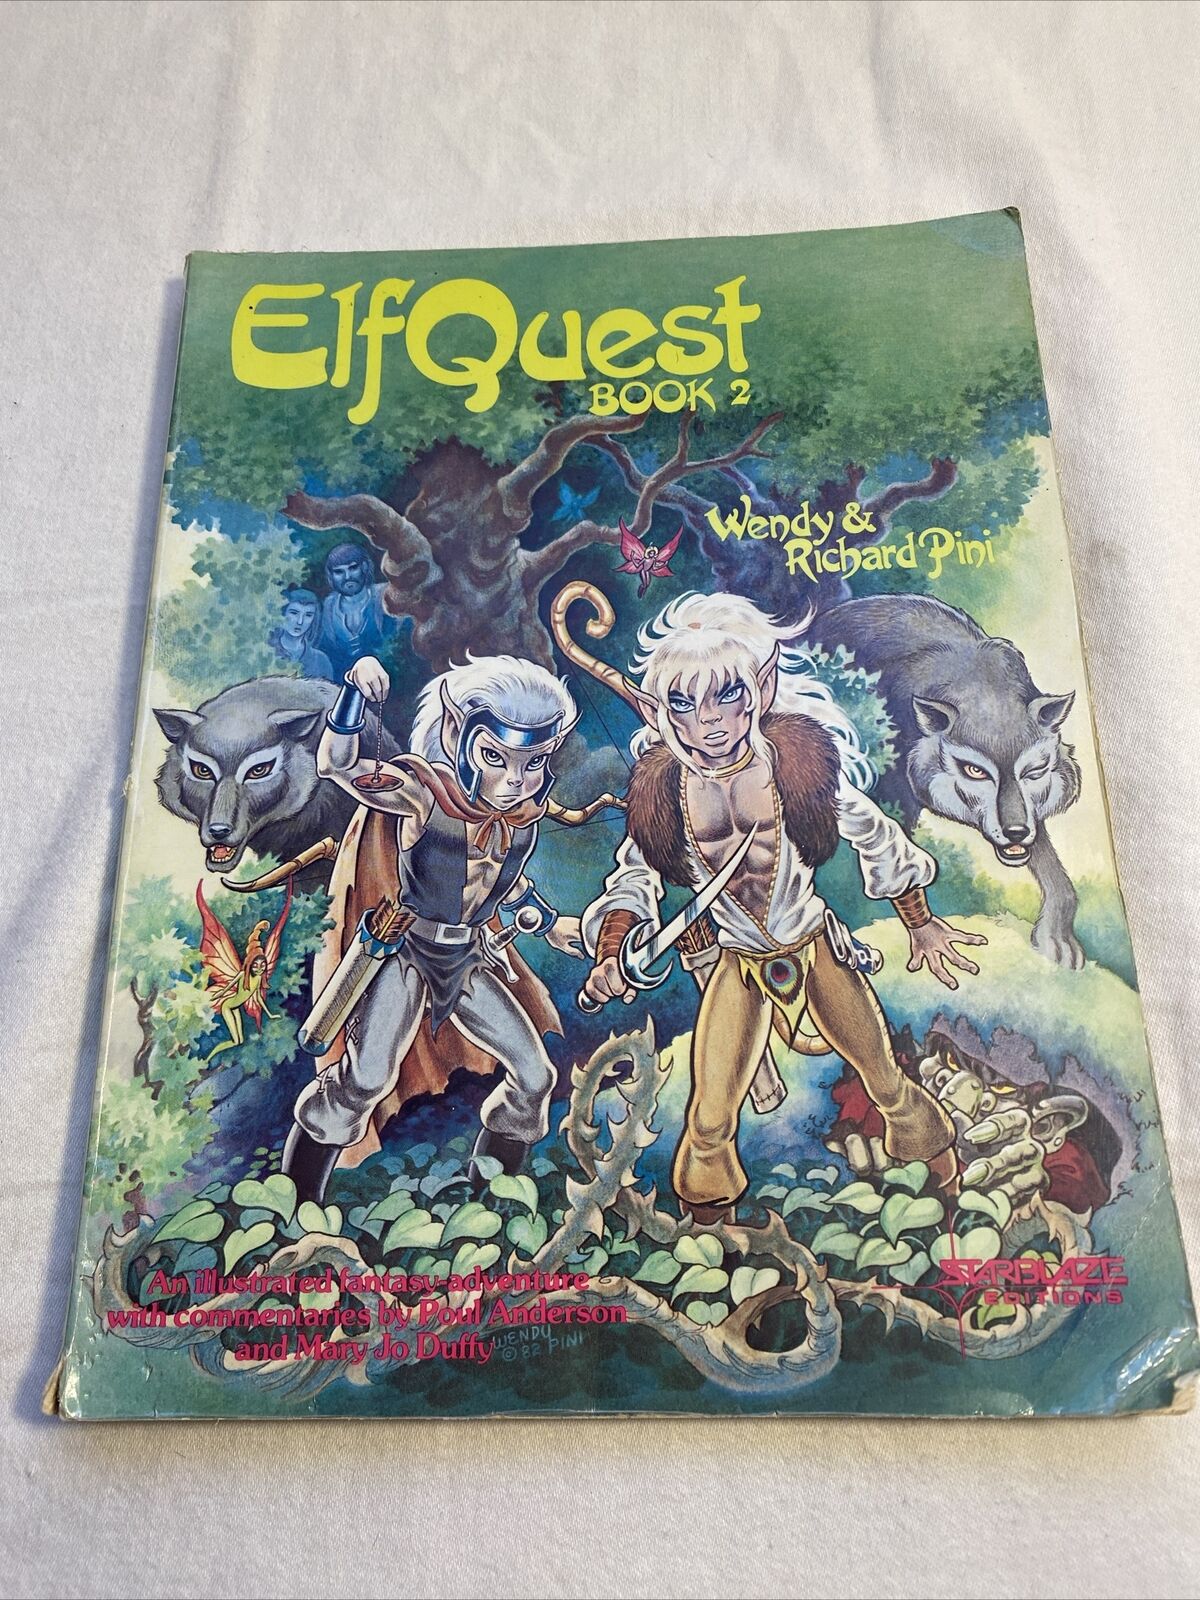 ElfQuest Book 2 by Wendy and Richard Pini 1982 Donning Starblaze Paperback